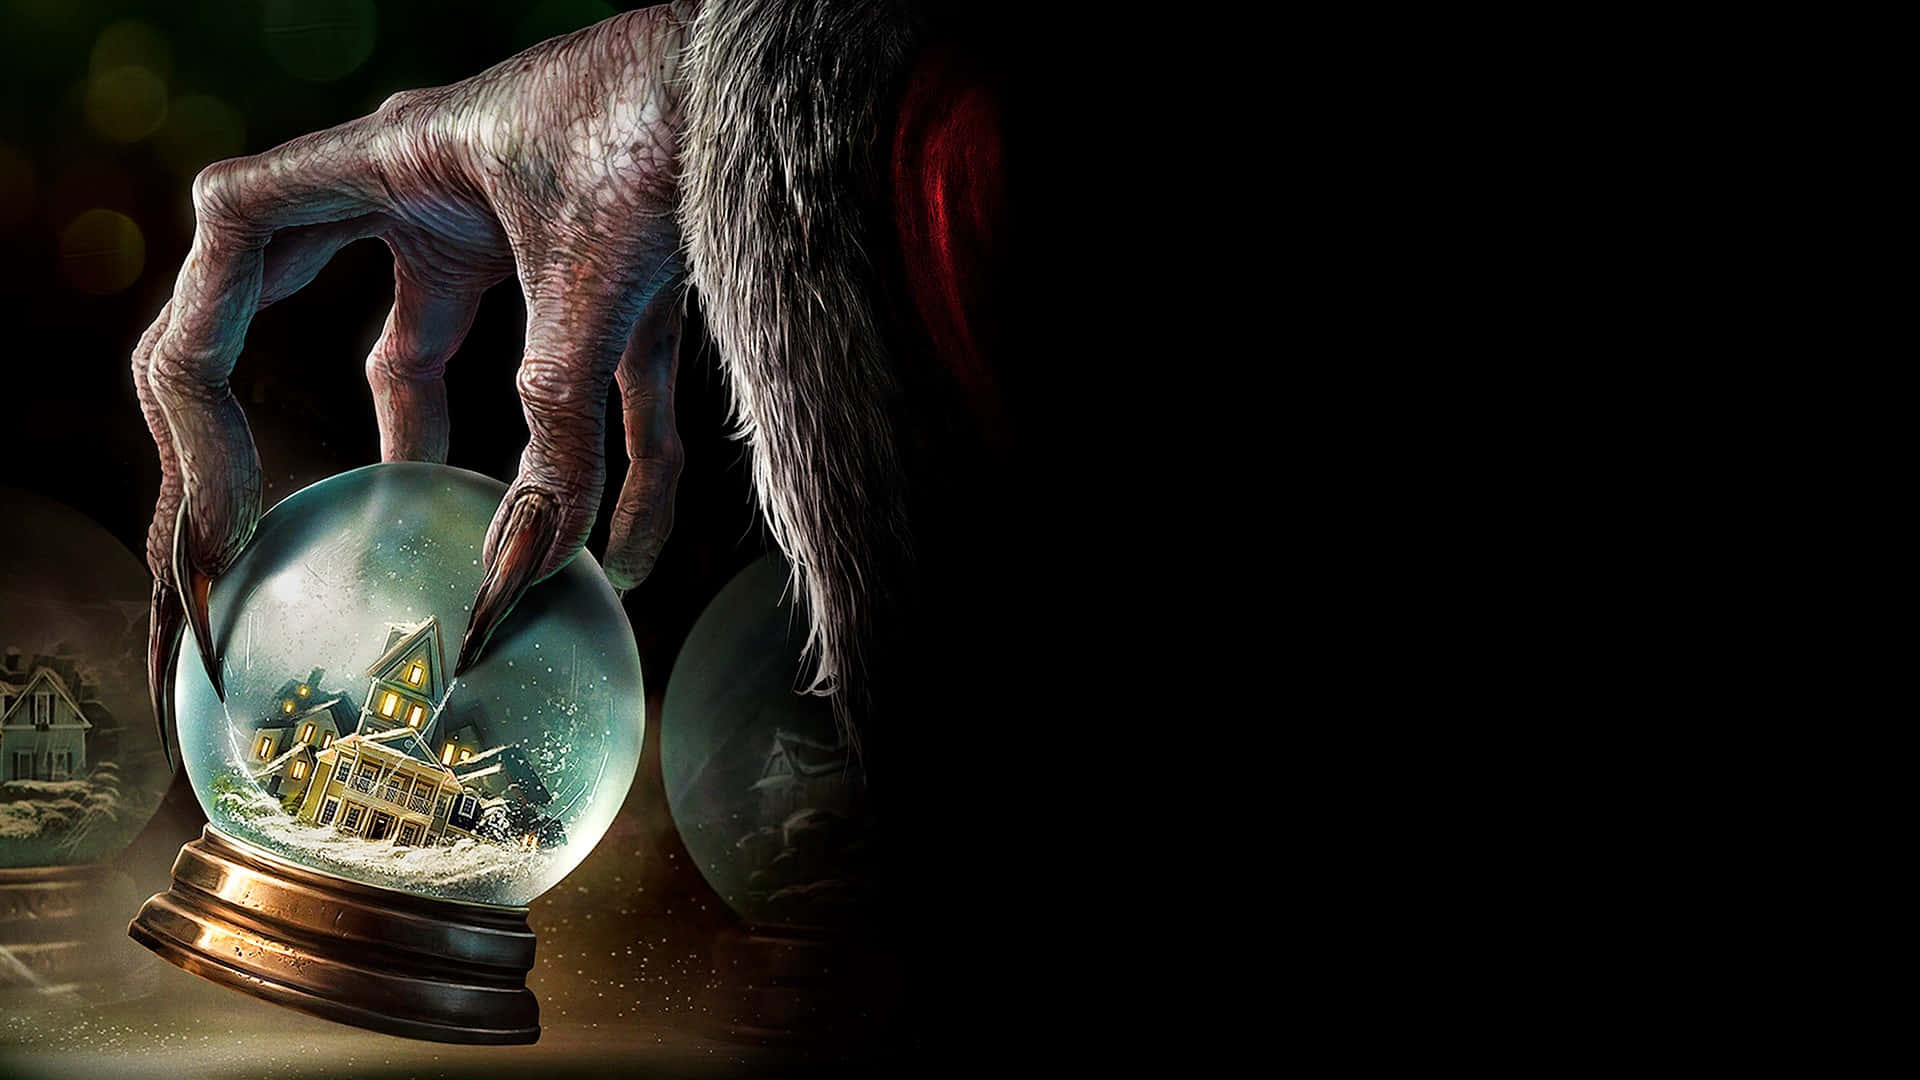 Image  The Legendary Krampus Comes To Life! Wallpaper